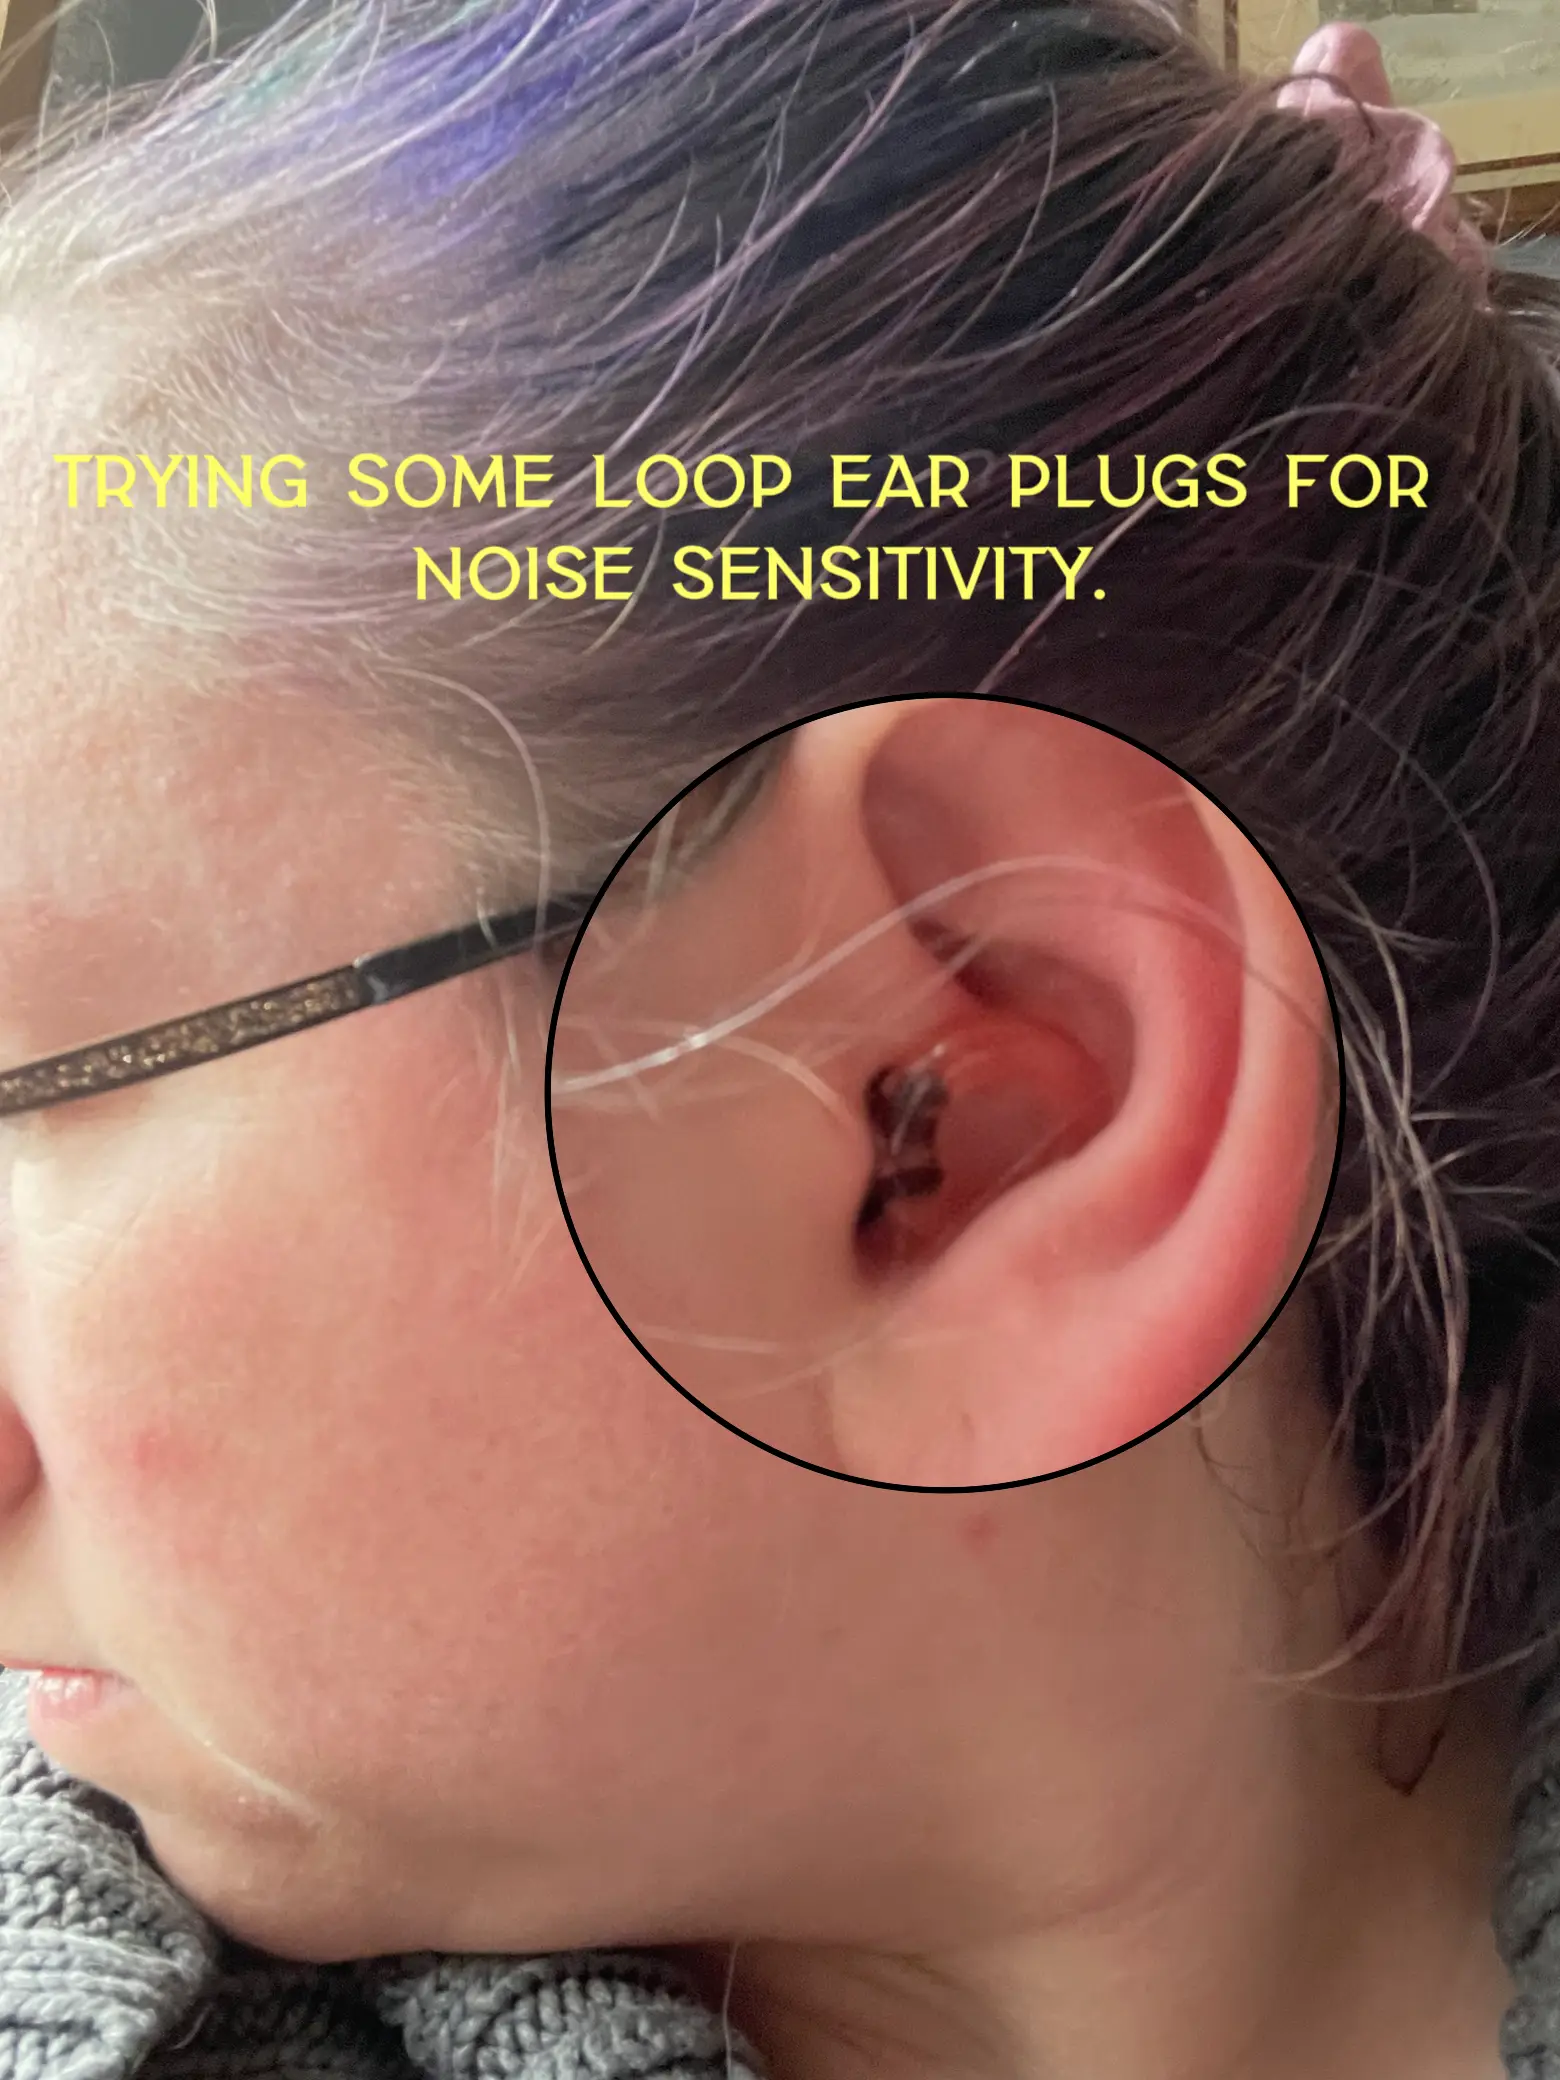 Best earplugs for concerts and noise sensitivity — Loop Experience 